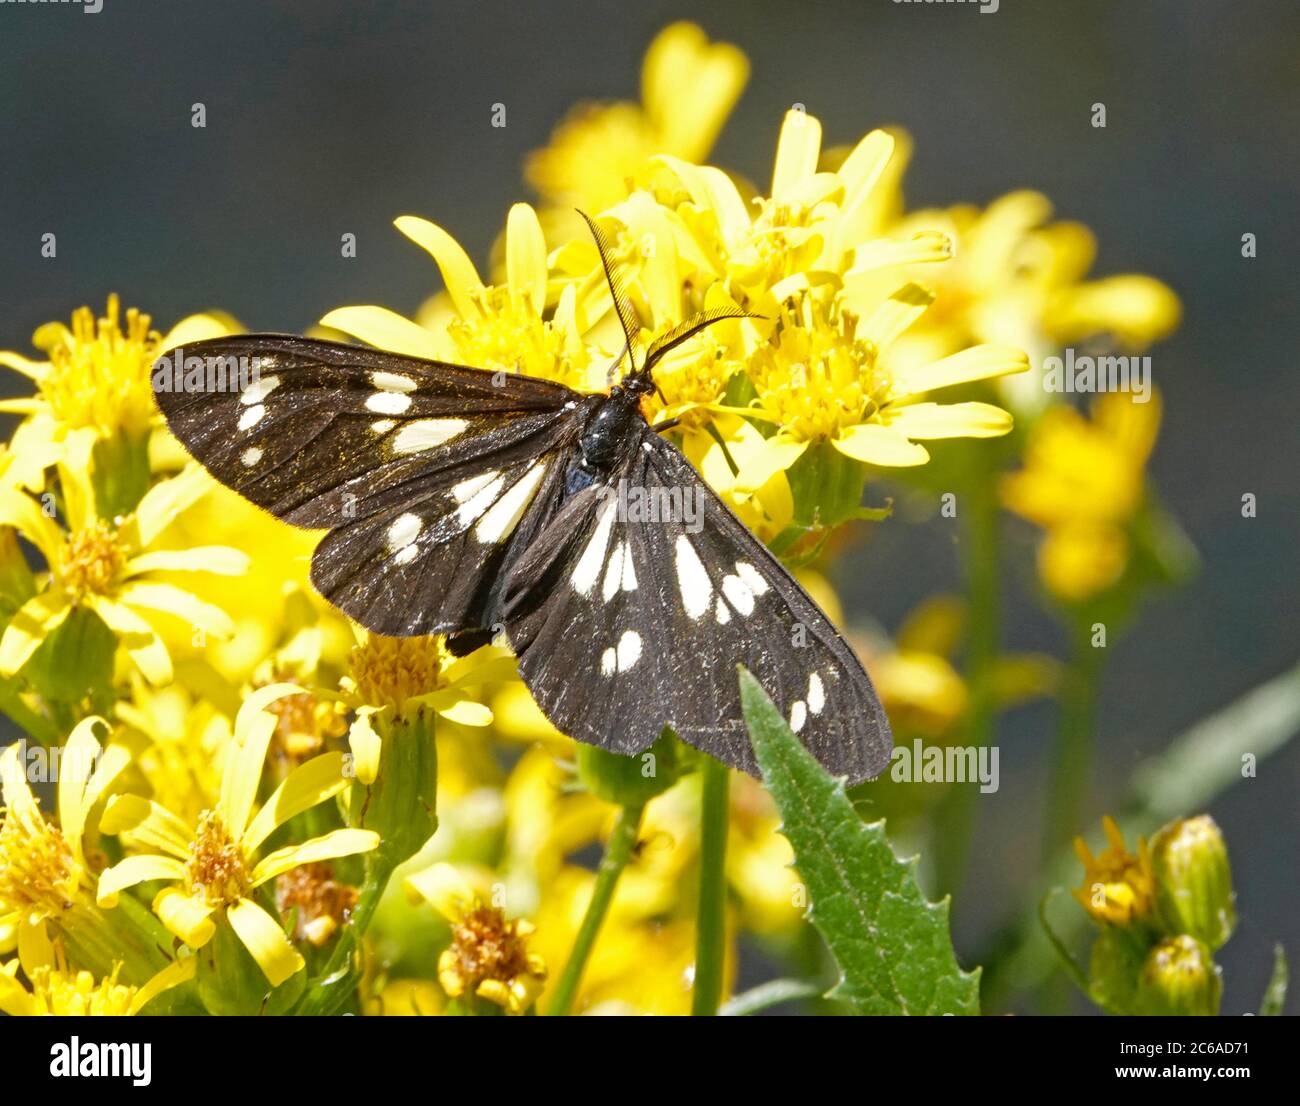 A police car moth, Gnophaela vermiculata, so named because of its black and white coloration, on a wildflower in the Cascade Mountains of Oregon. Stock Photo